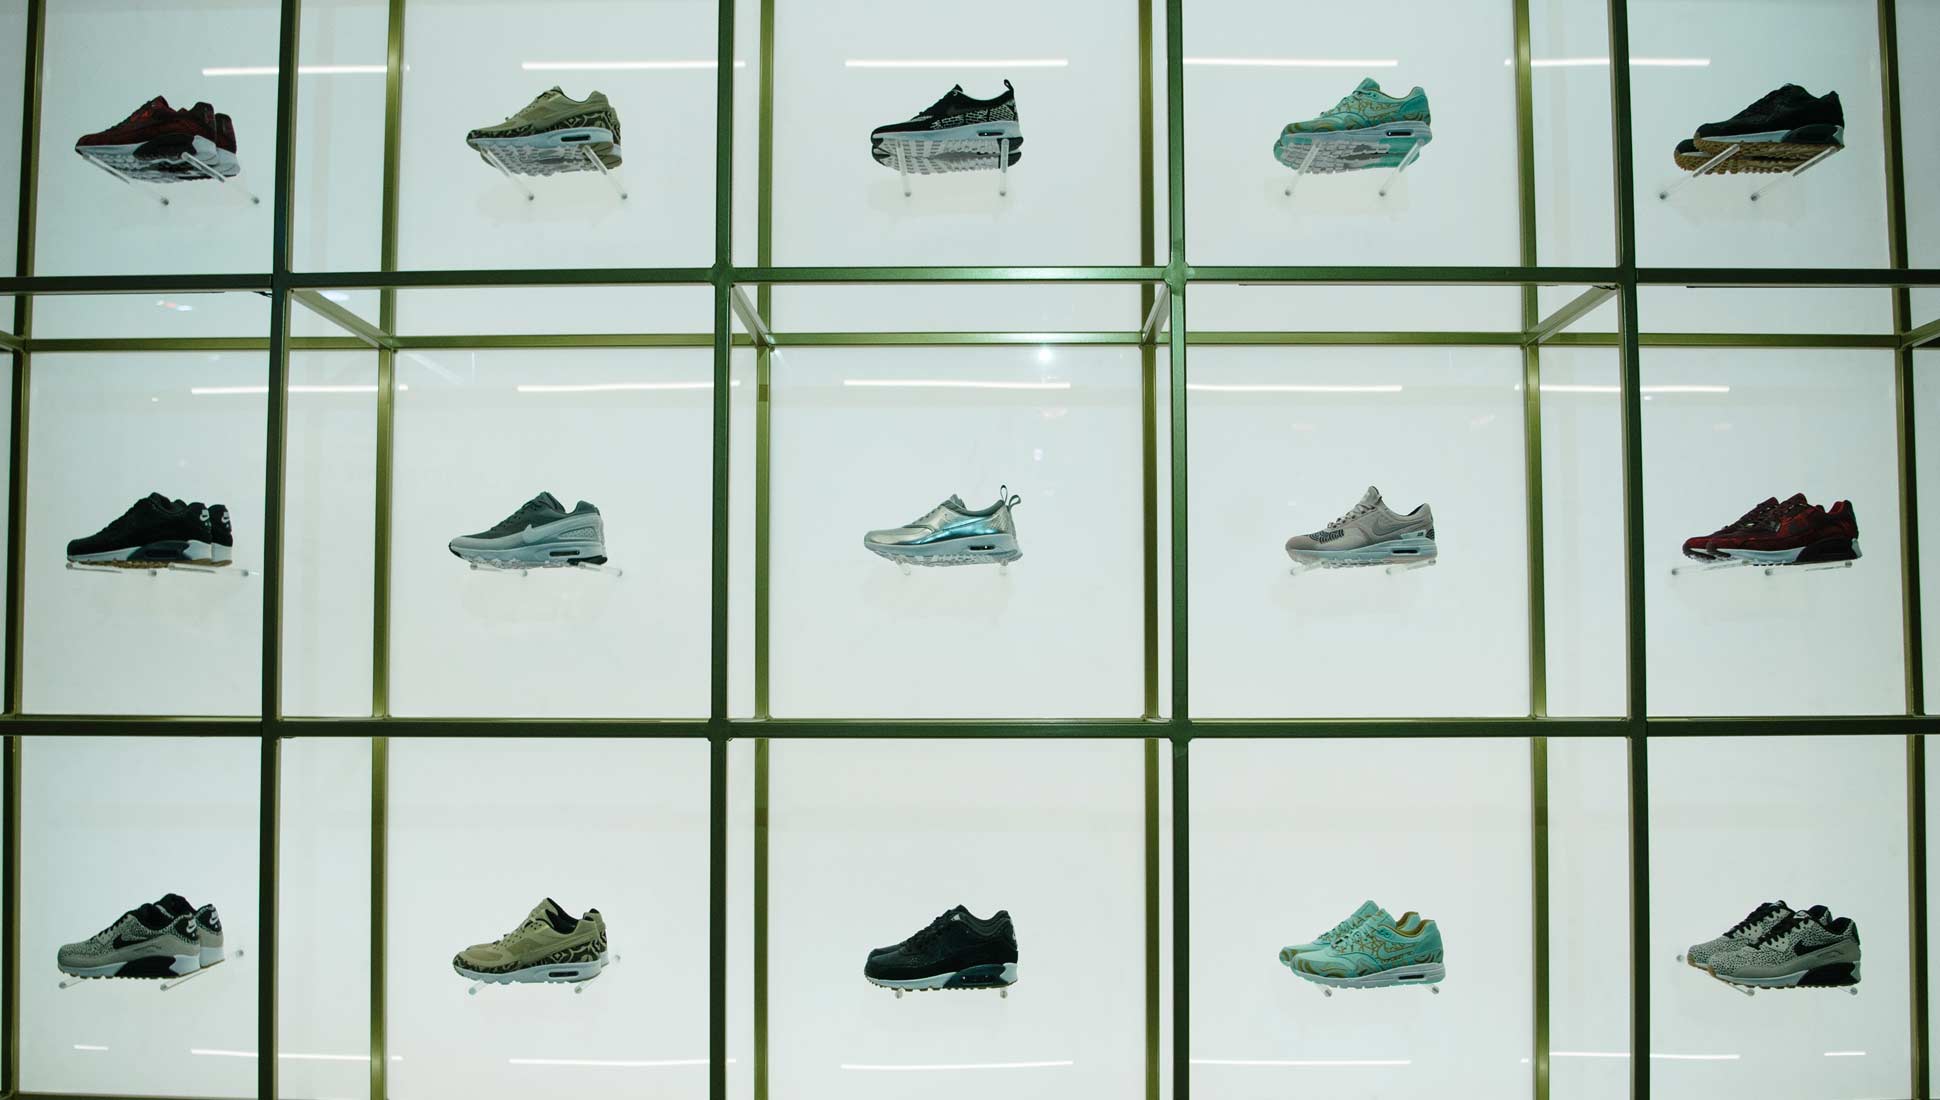 Inside Nike Air Max Con New York - SoccerBible